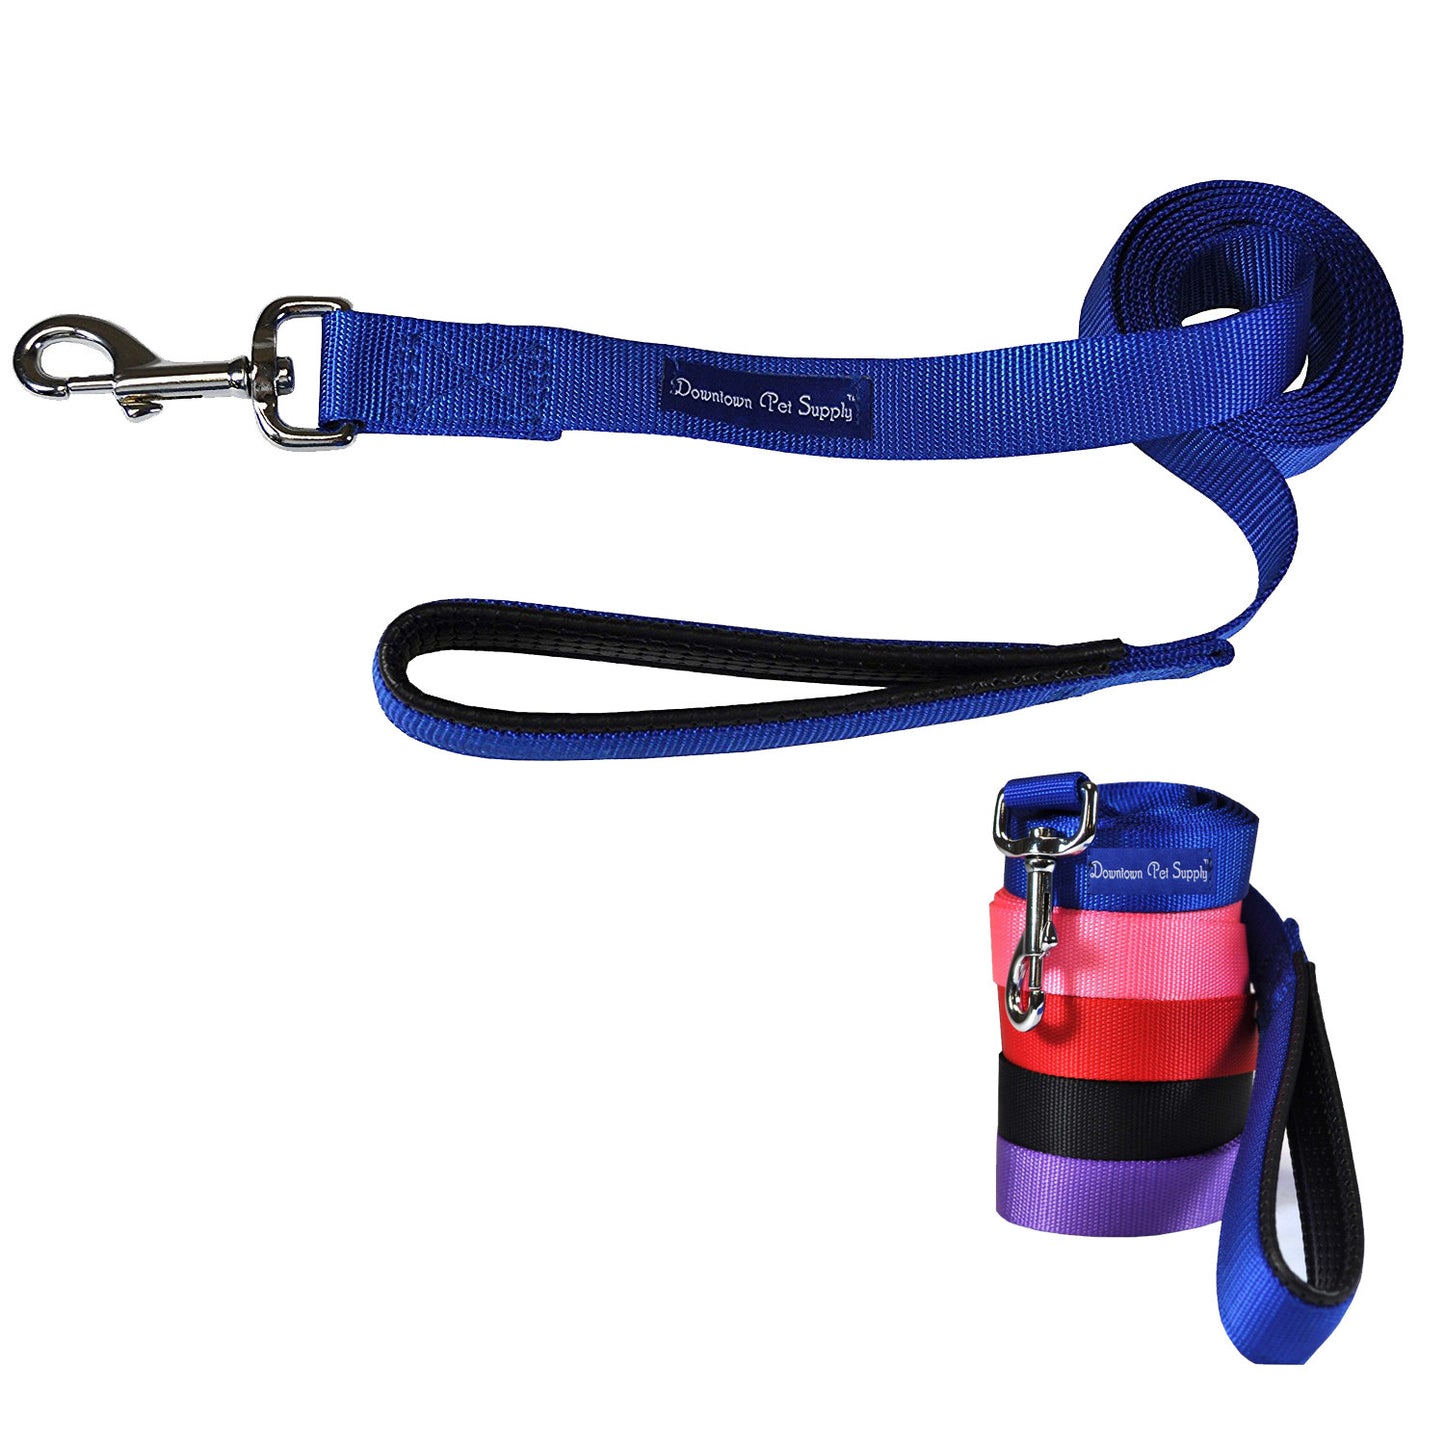 4' Strong Dog Leash - Multi-Color Options